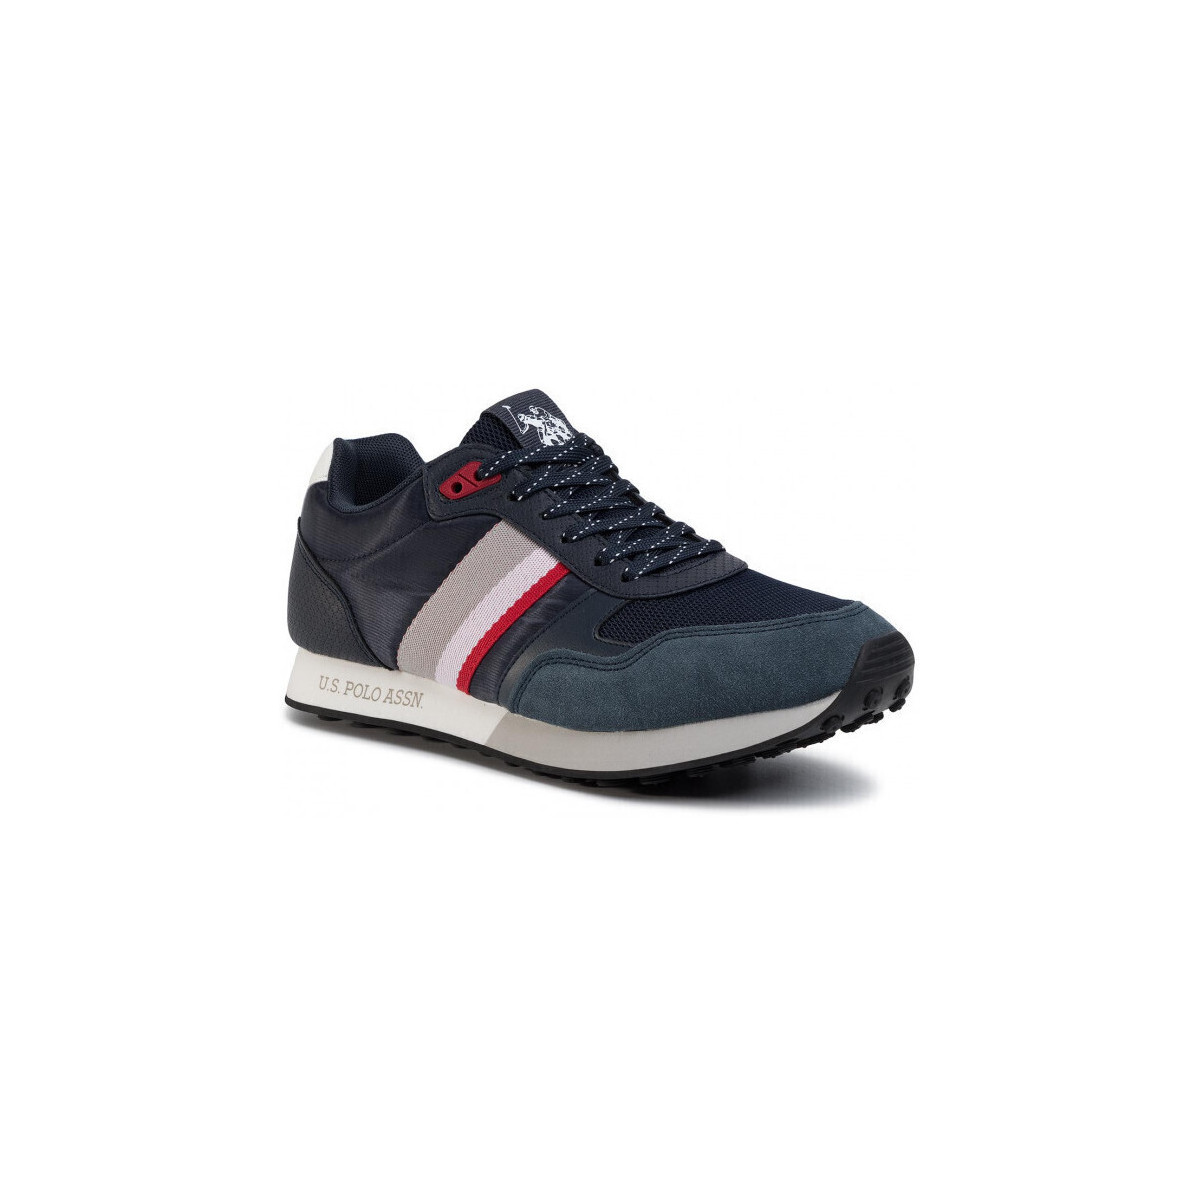 Xαμηλά Sneakers U.S Polo Assn. Αθλητικά παπούτσια US POLO ASSN Julius2 FLASH4088S9SN2-DKBL